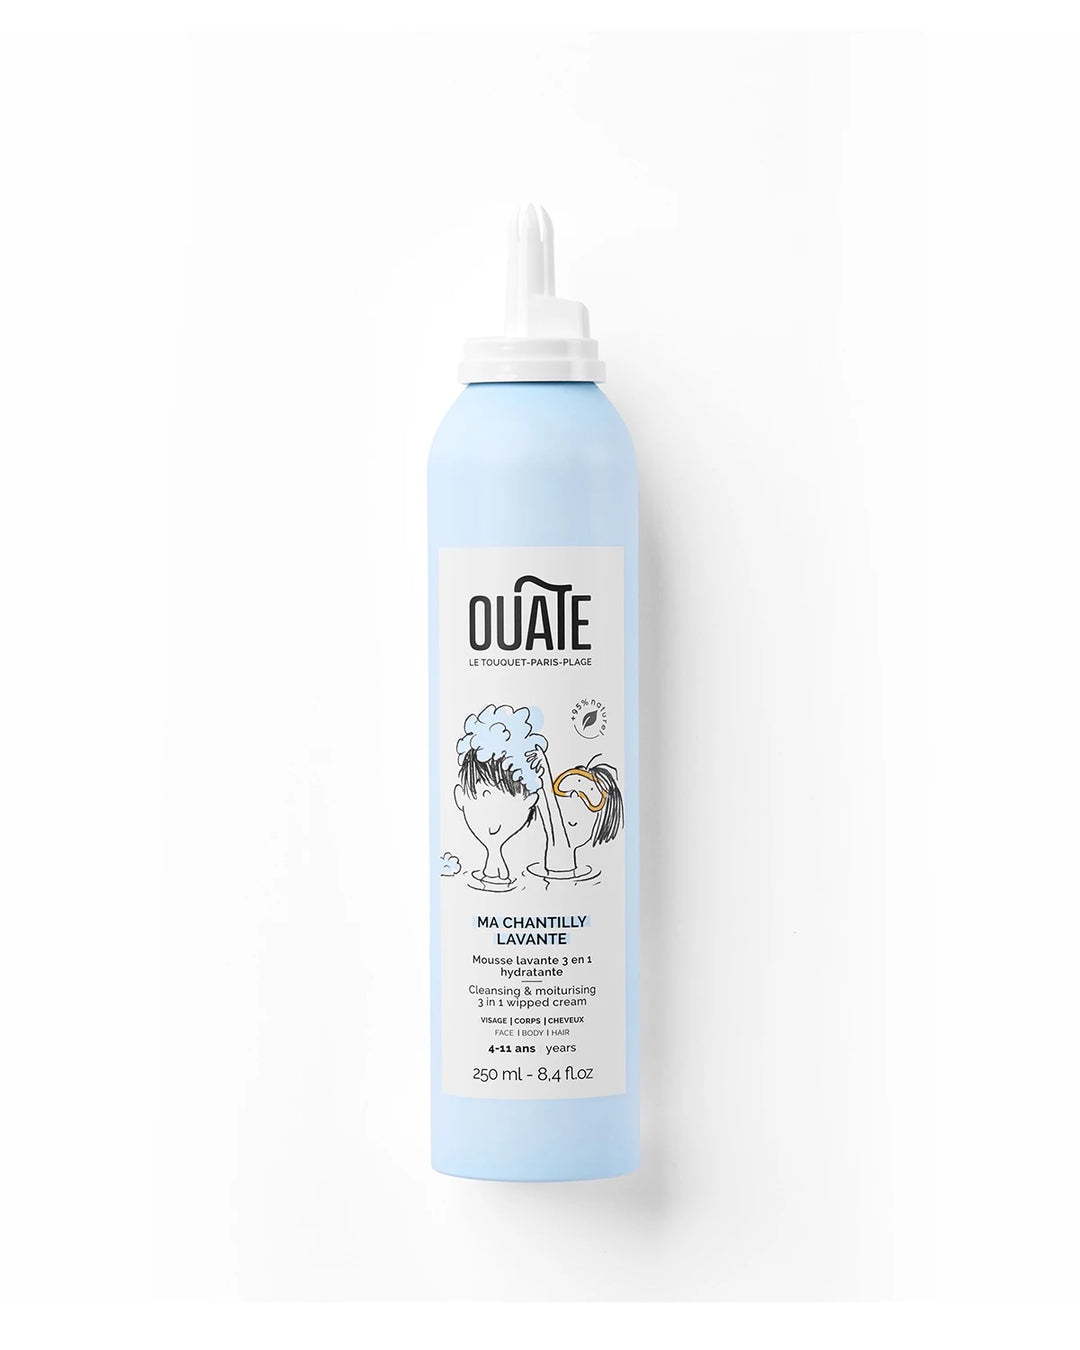 OUATE Boys/Girls My Cleansing Whipped Cream 3-in-1 Cleansing Foam